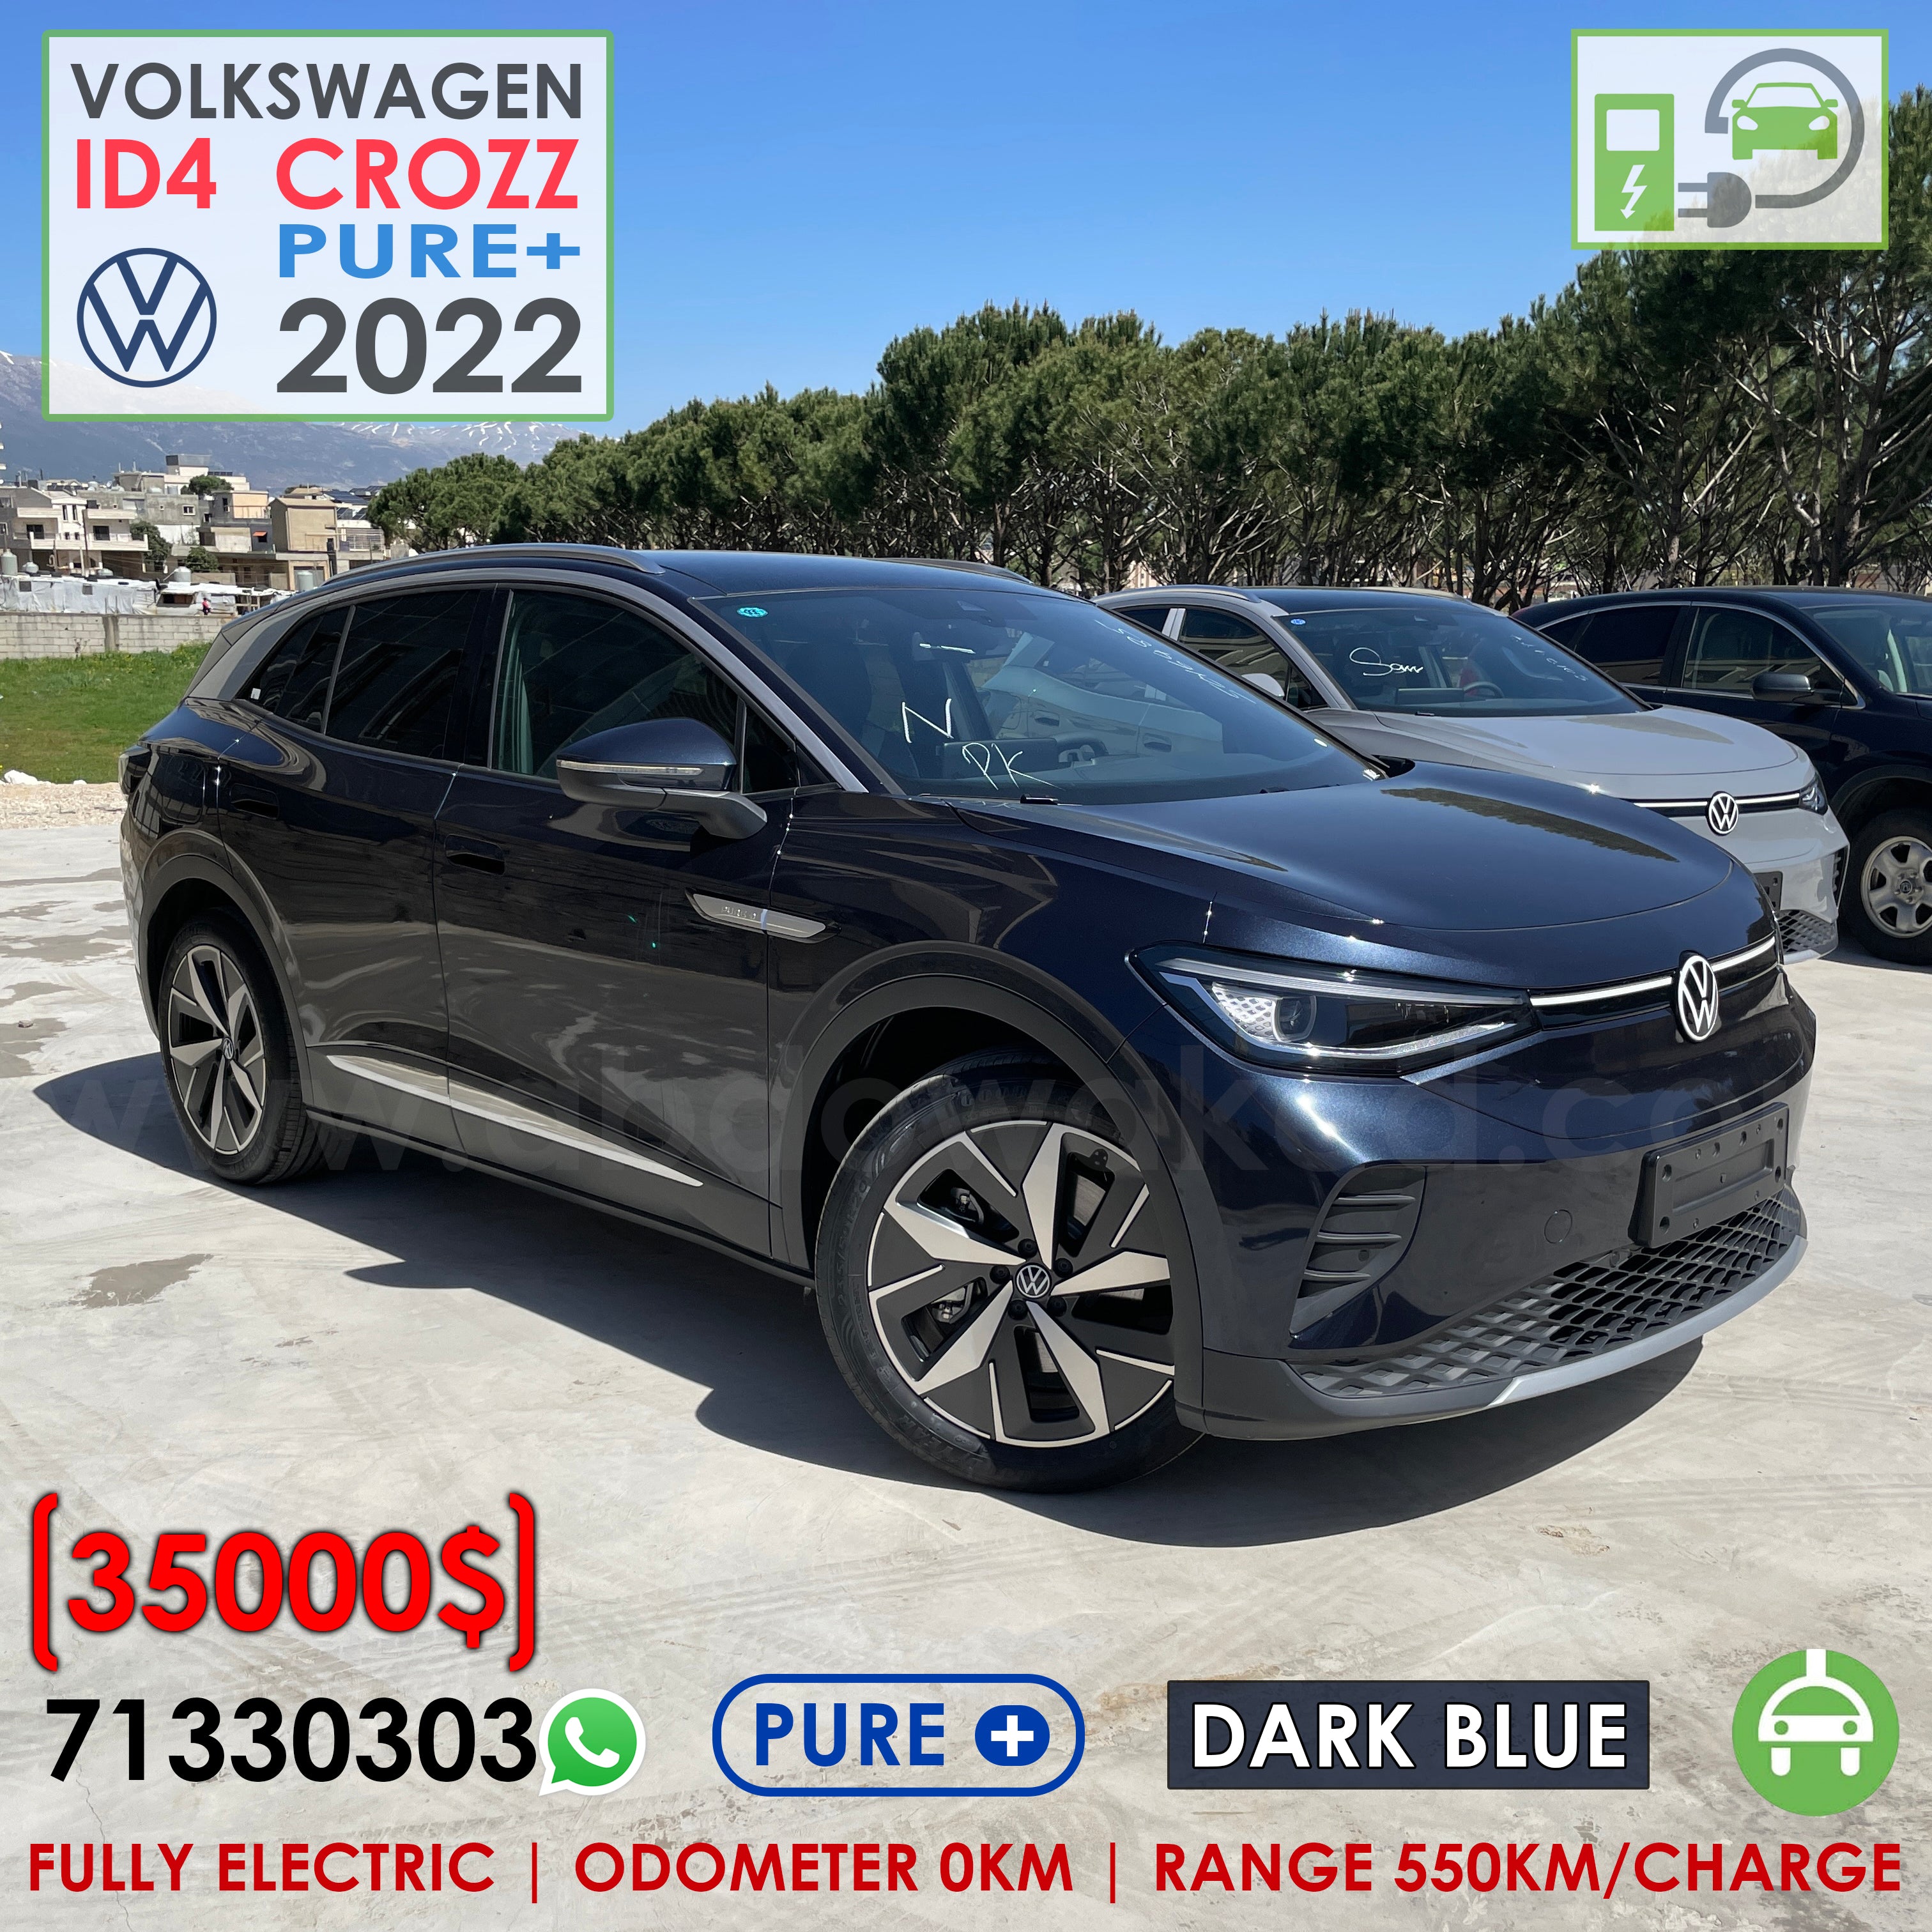 VW ID4 Crozz Pure+ 2022 Dark Blue Color 550km Range/Charge Fully Elect –  Abdo Waked EV